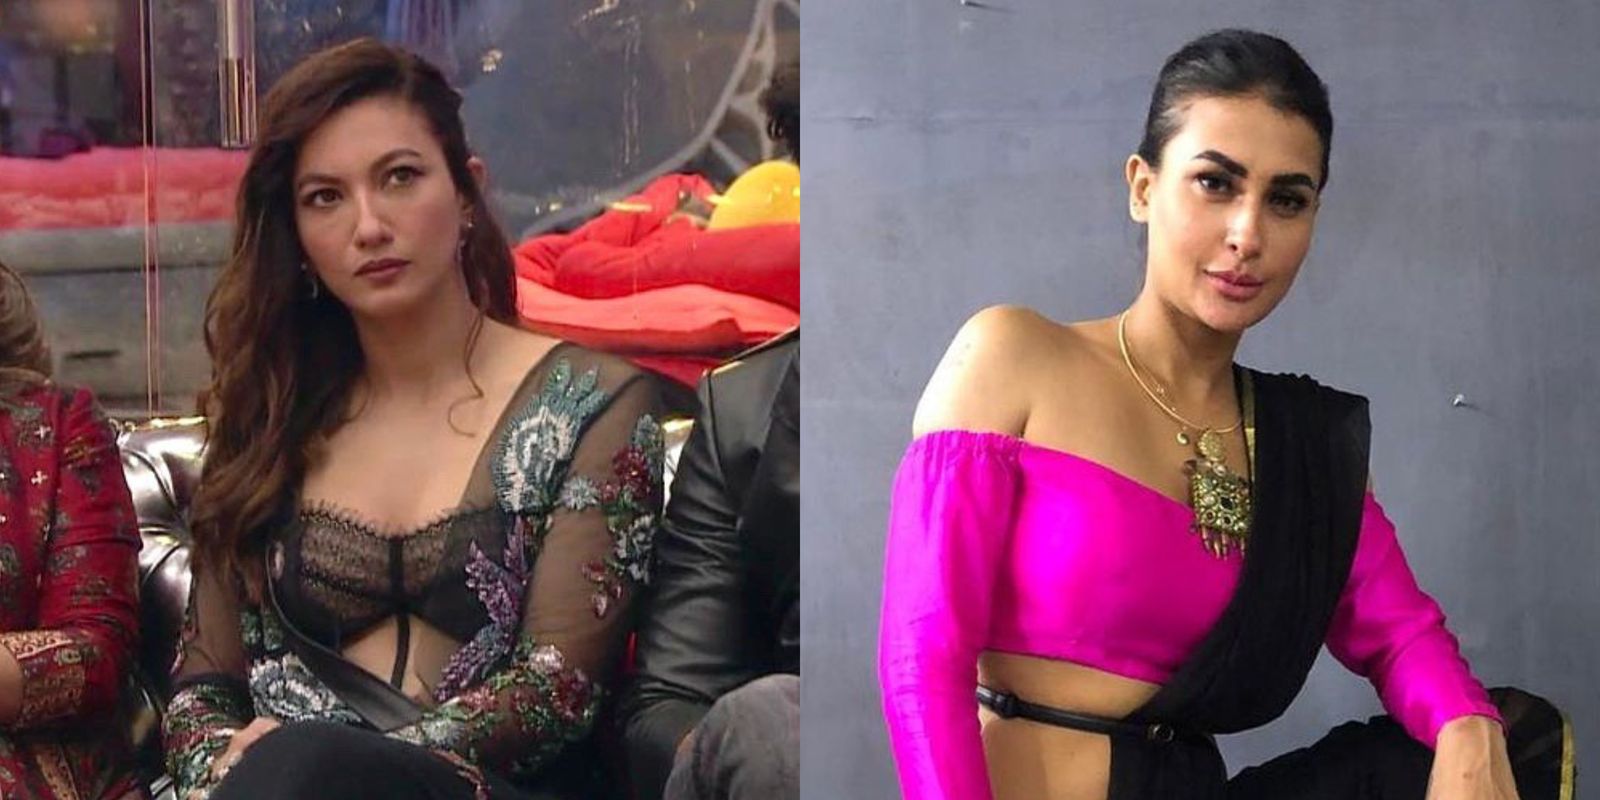 Bigg Boss 14 Senior Gauahar Khan On Pavitra Punia: ‘The Way She Abused Me Depicted Her Personality’